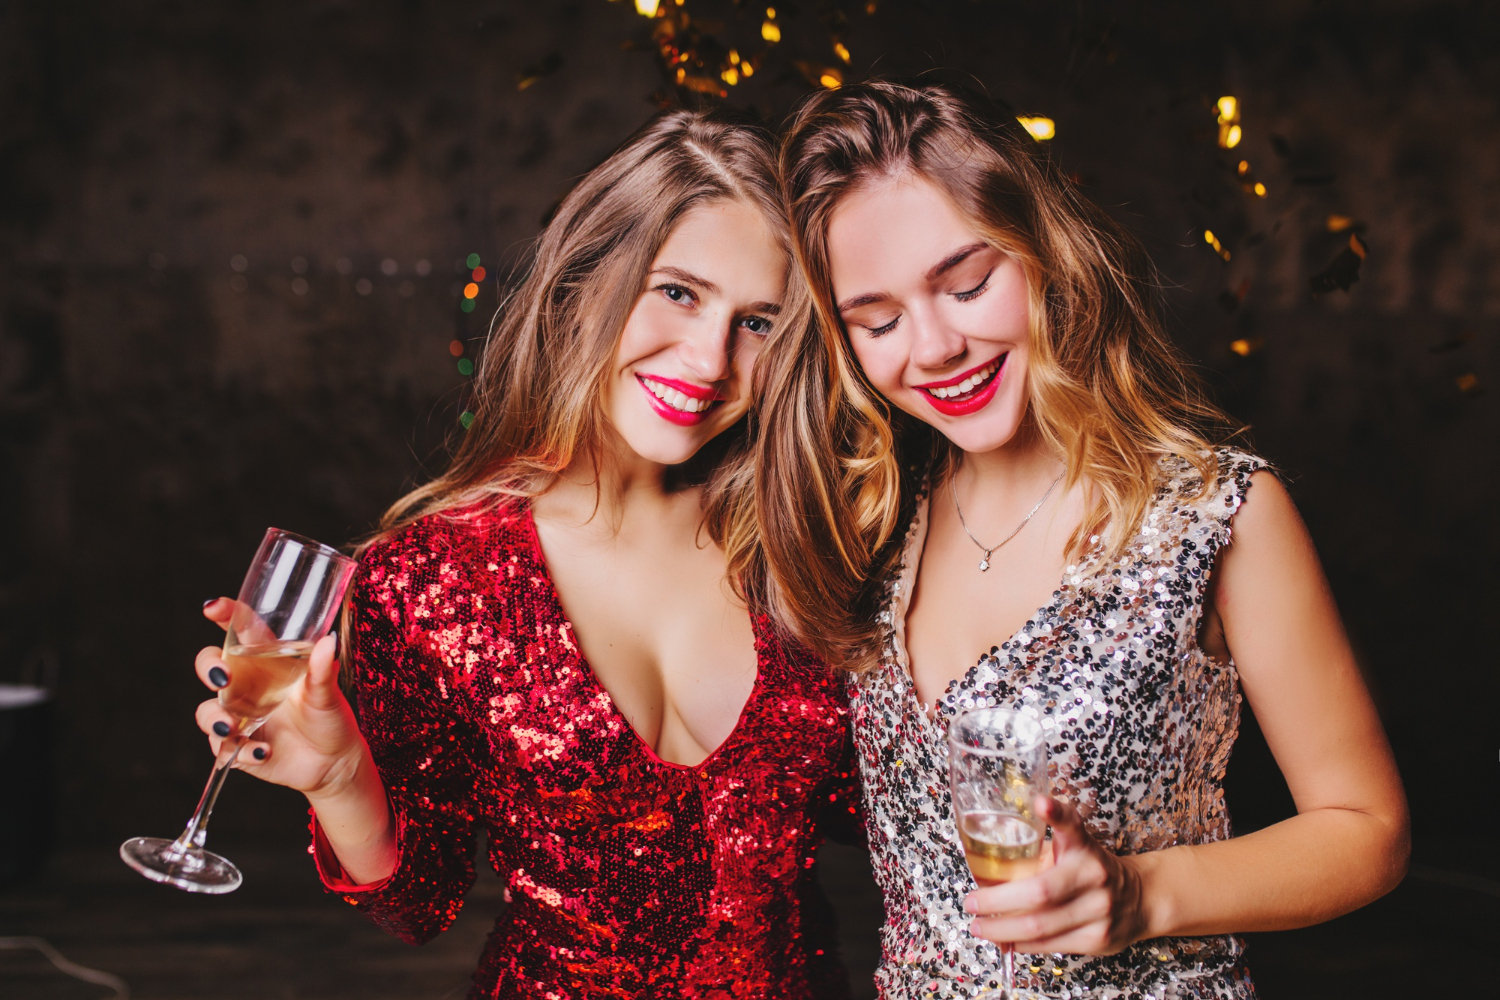 indoor clubbing young girls trendy in sparkle attire enjoying a party